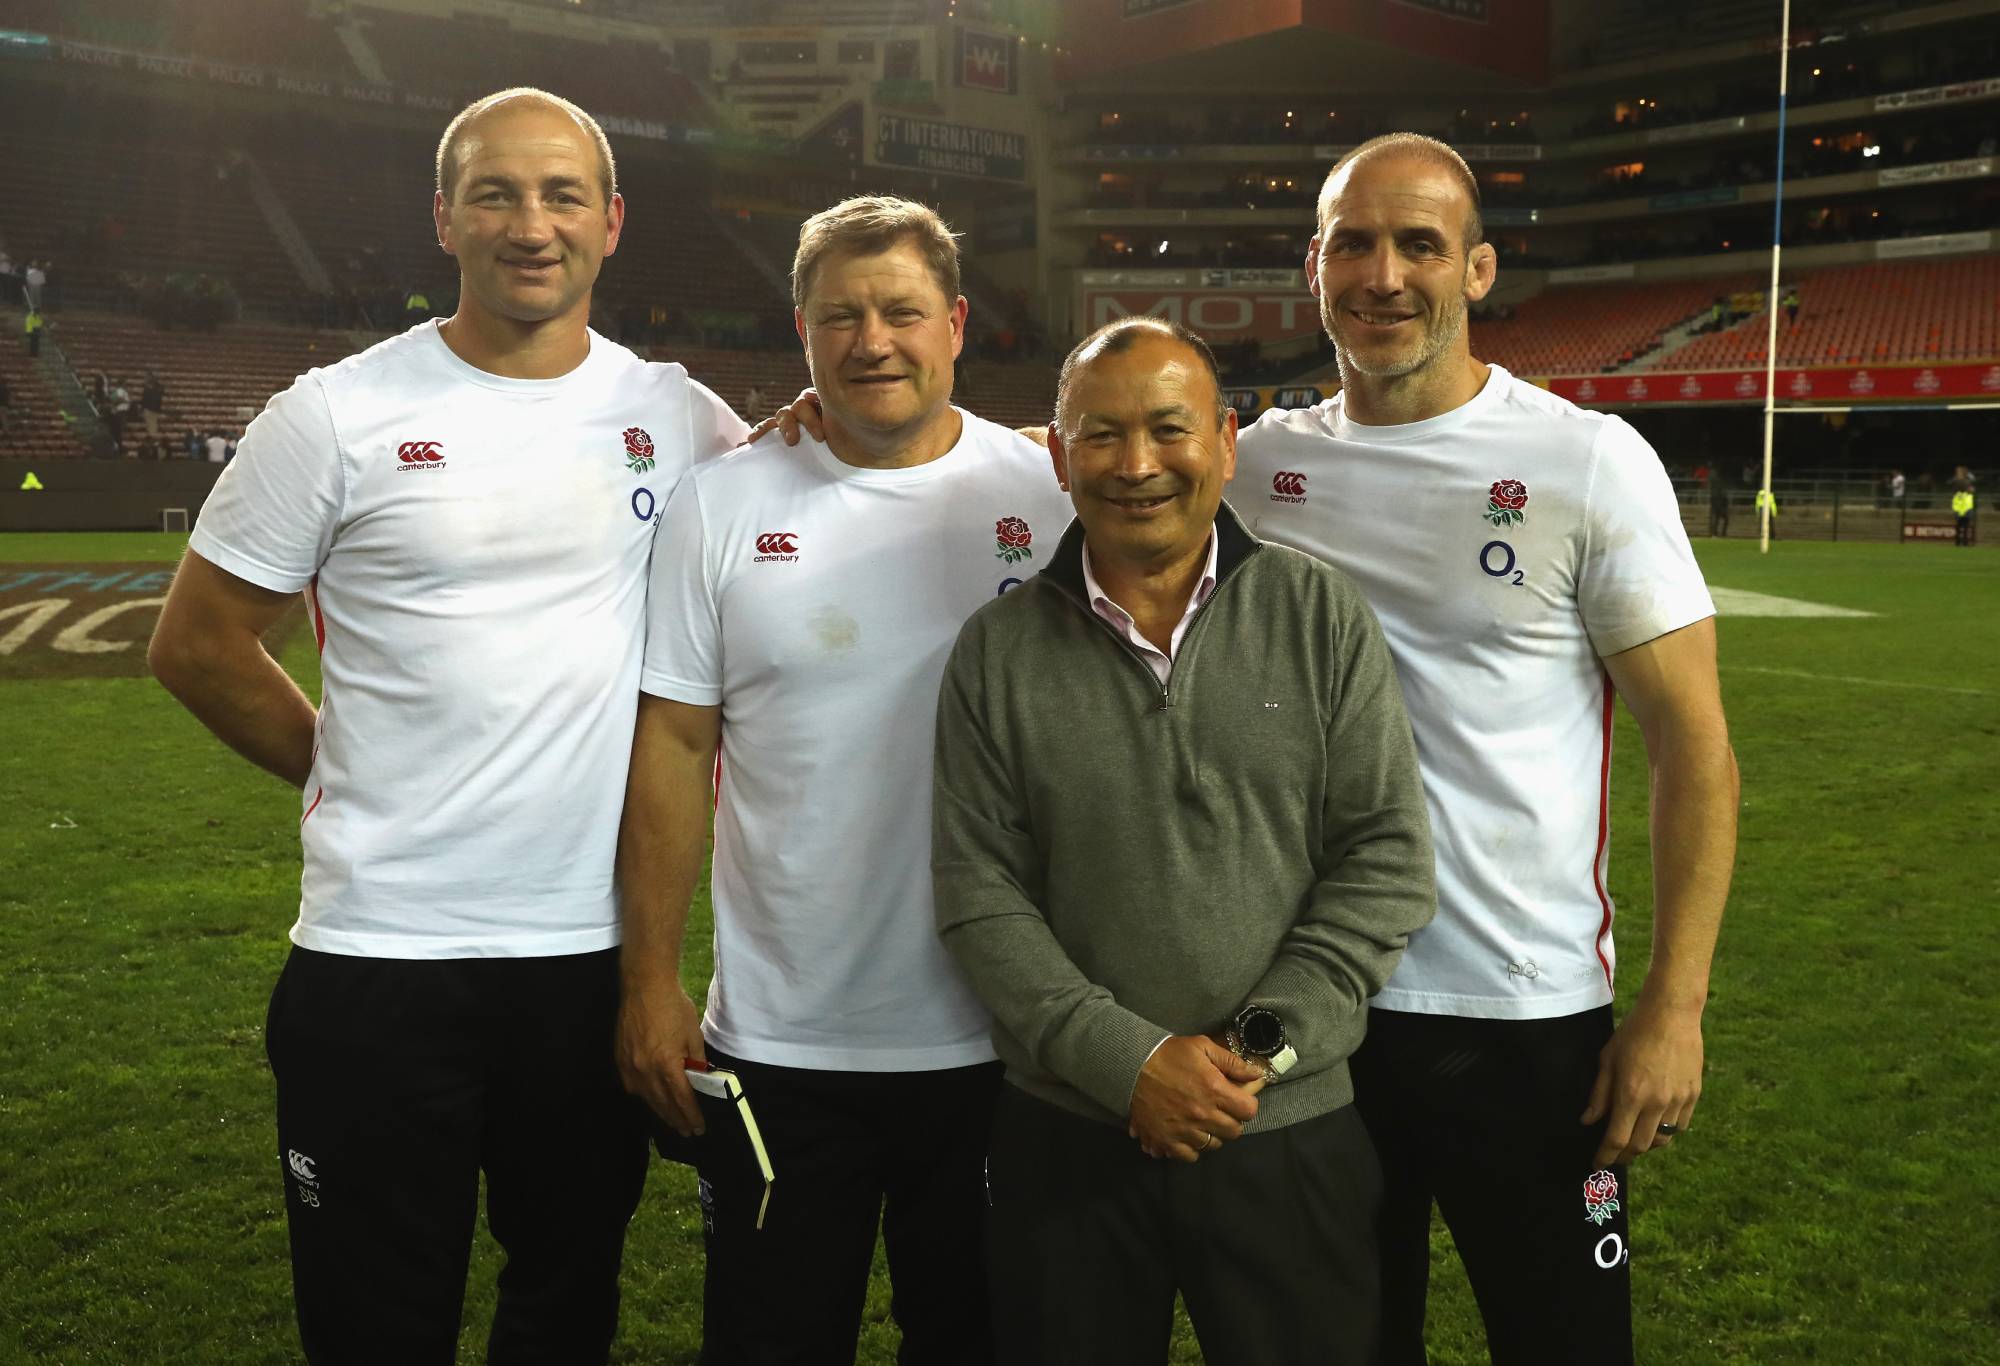 The England coaches, Steve Borthwick, forwards coach, Neal Hatley, the scrum coach, head coach Eddie Jones and Paul Gustard, the defence caoch pose after their victory during the third test match between South Africa and England at Newlands Stadium on June 23, 2018 in Cape Town, South Africa. (Photo by David Rogers/Getty Images)